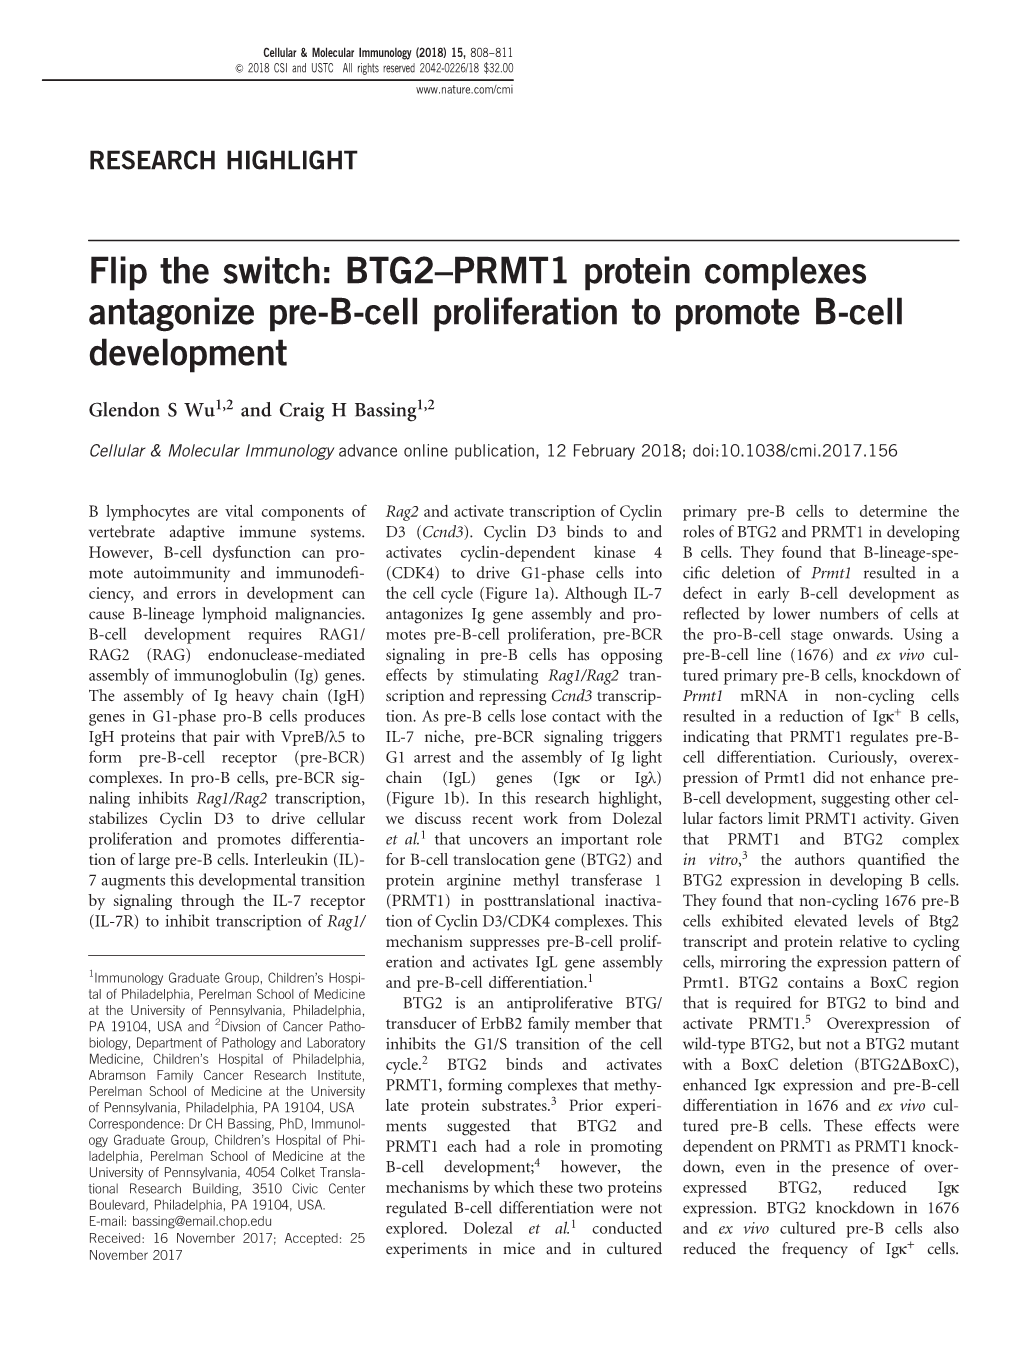 BTG2–PRMT1 Protein Complexes Antagonize Pre-B-Cell Proliferation to Promote B-Cell Development